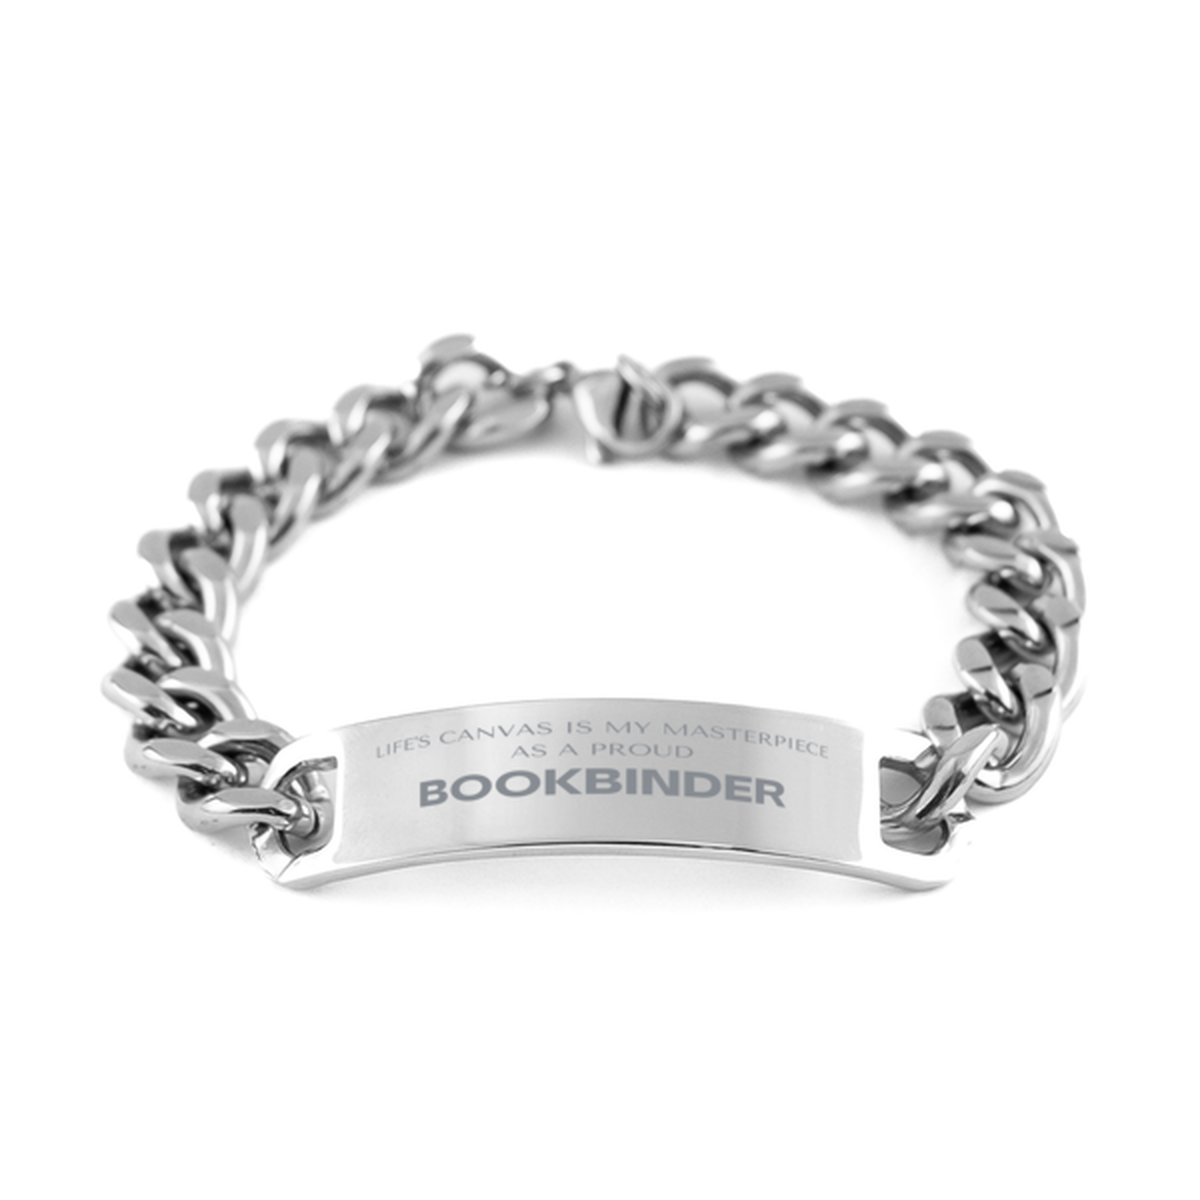 Proud Bookbinder Gifts, Life's canvas is my masterpiece, Epic Birthday Christmas Unique Cuban Chain Stainless Steel Bracelet For Bookbinder, Coworkers, Men, Women, Friends